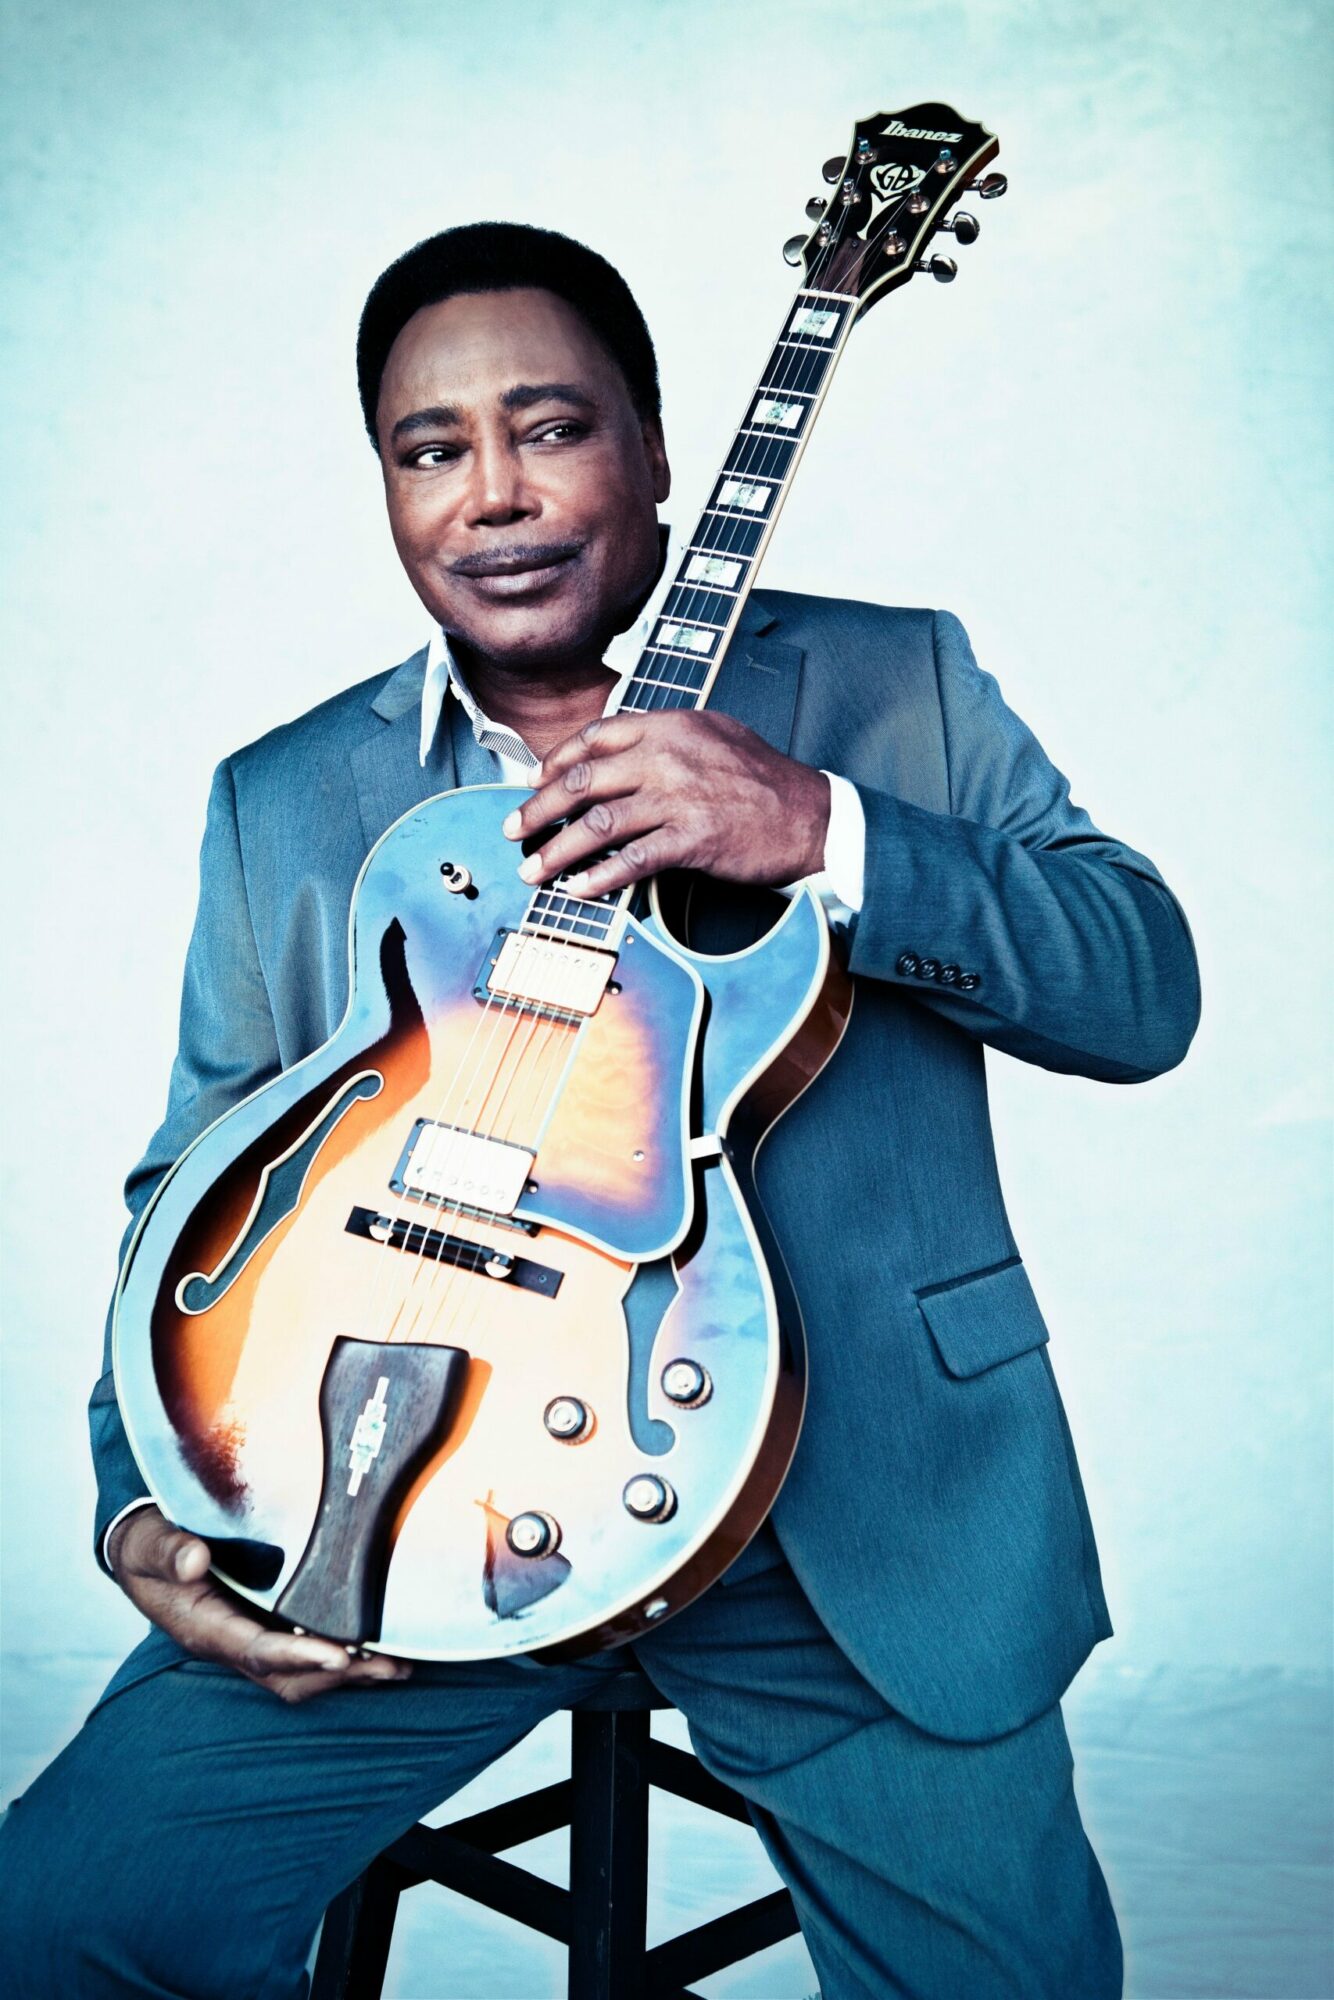 Image name George Benson Premium Package the Luxury Experience at First Direct Arena Leeds scaled the 19 image from the post George Benson at First Direct Arena, Leeds in Yorkshire.com.